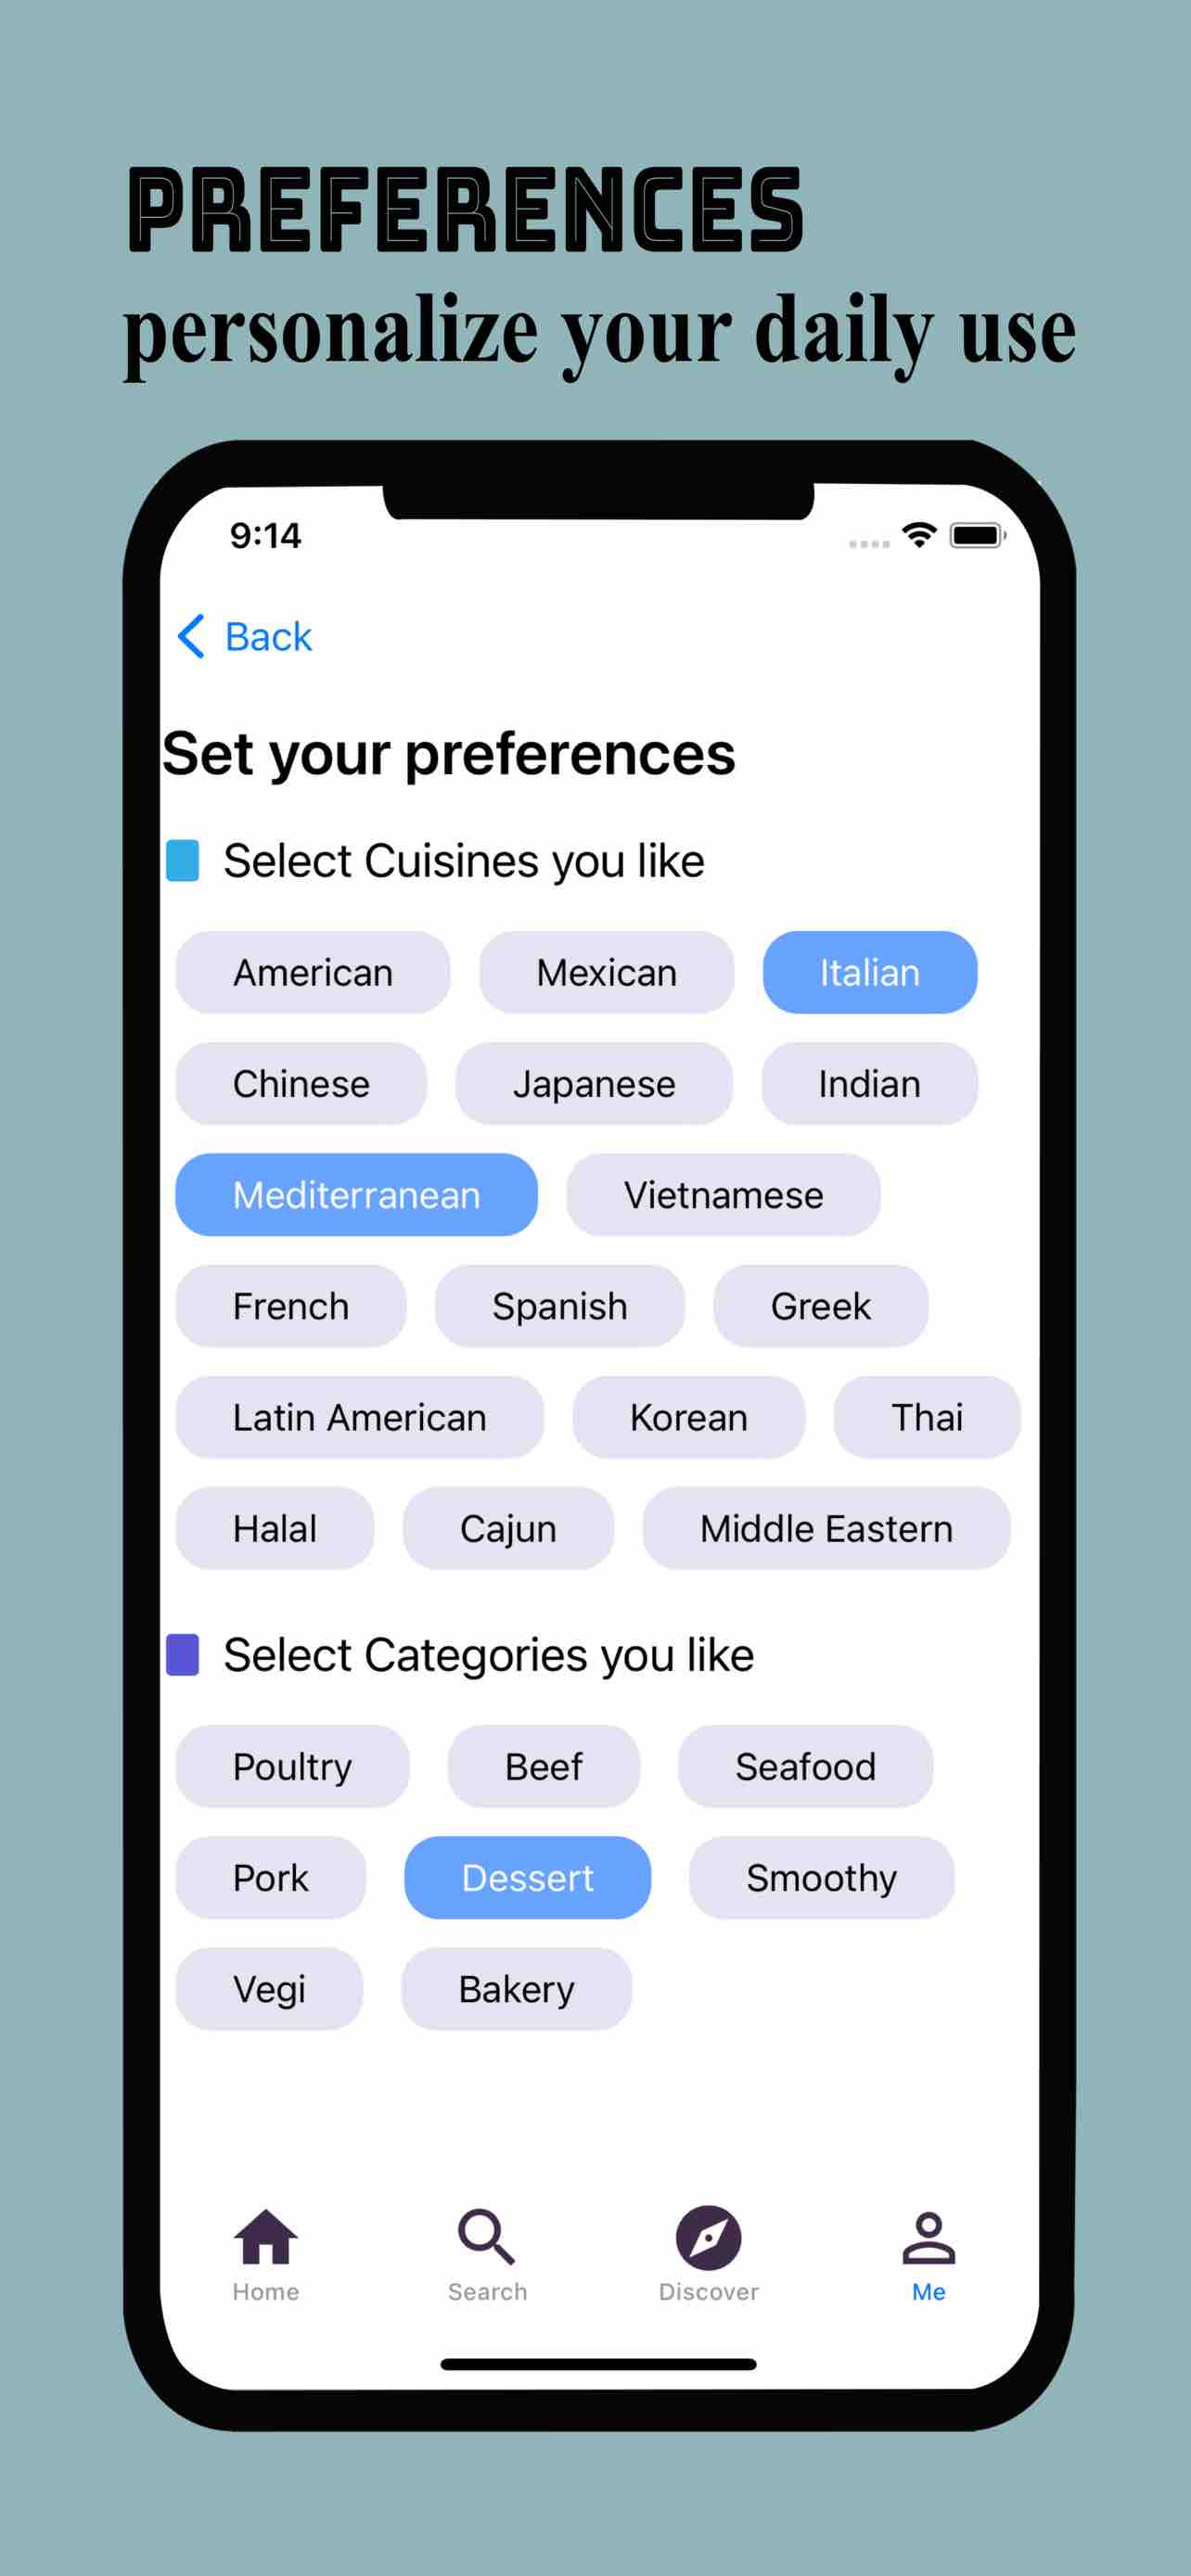 FoodSpot set preferences for personalized experience